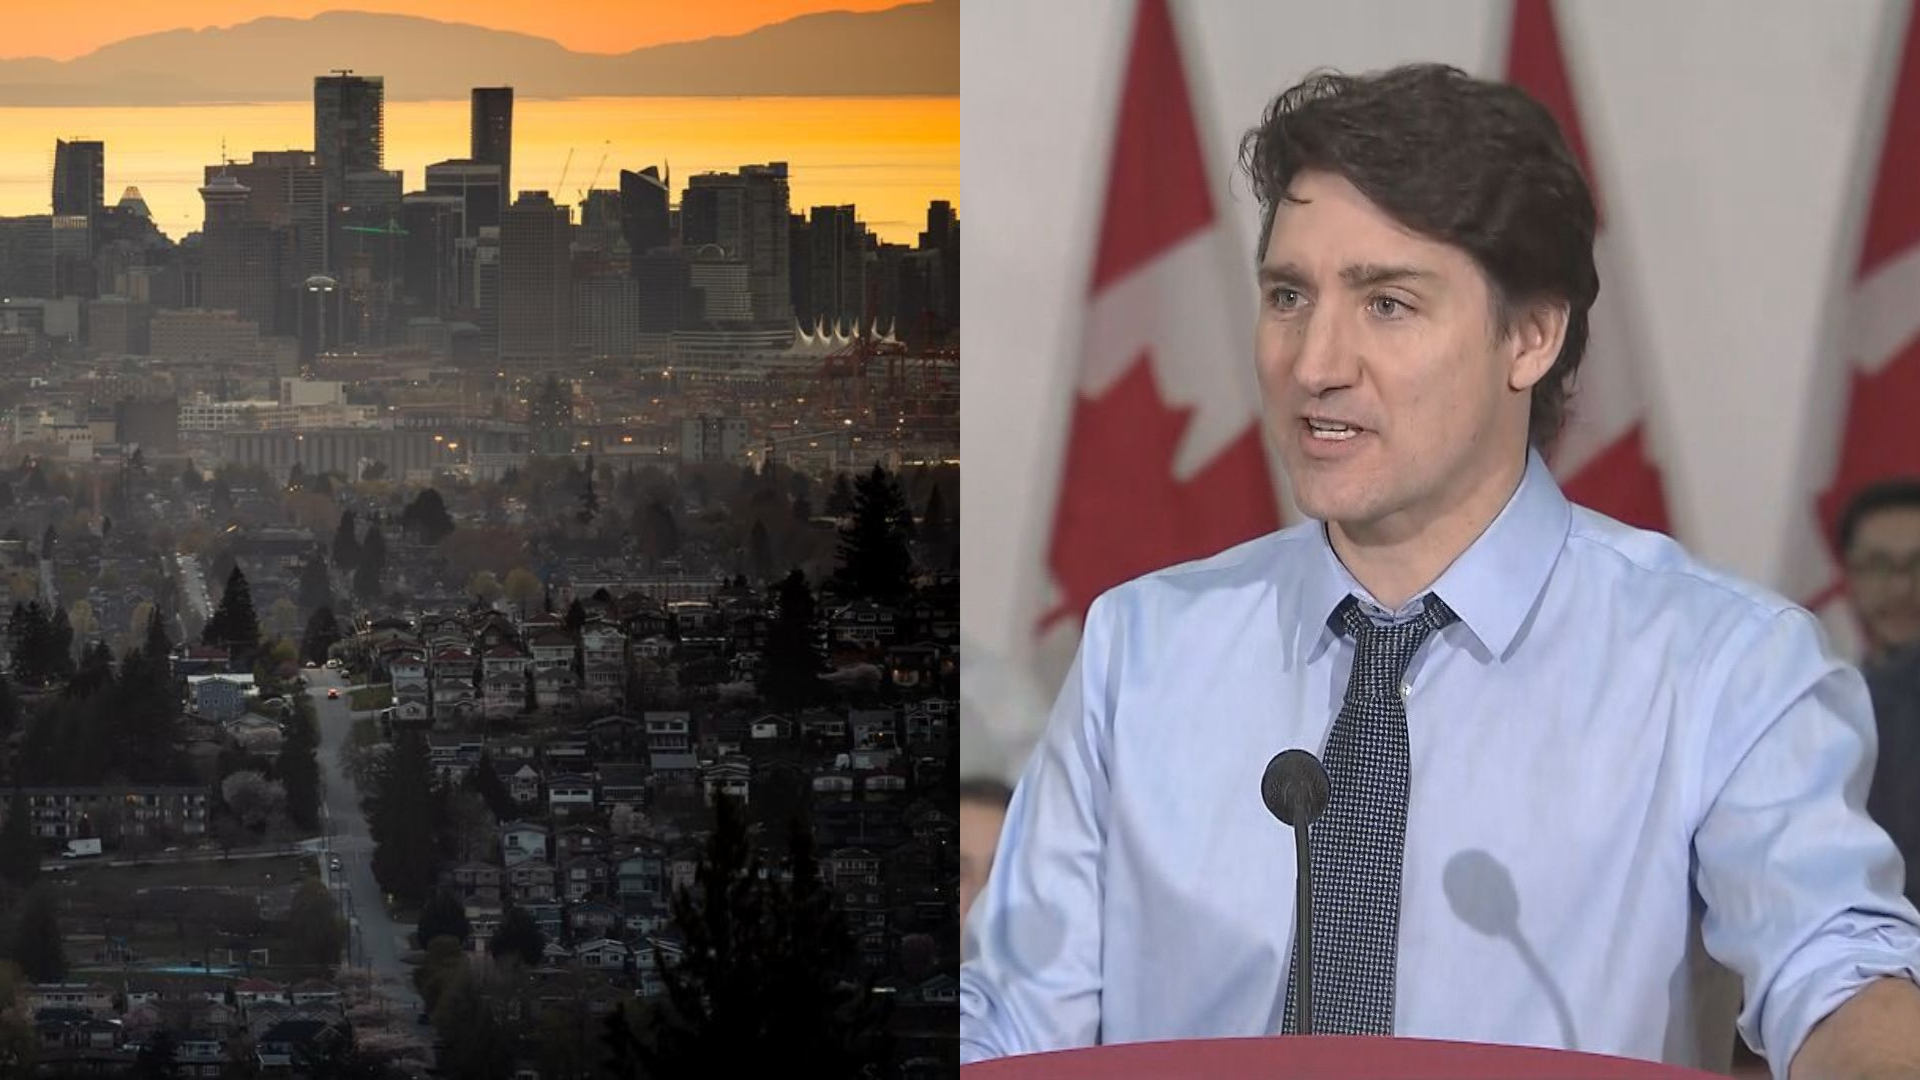 Trudeau announced new measures to help renters